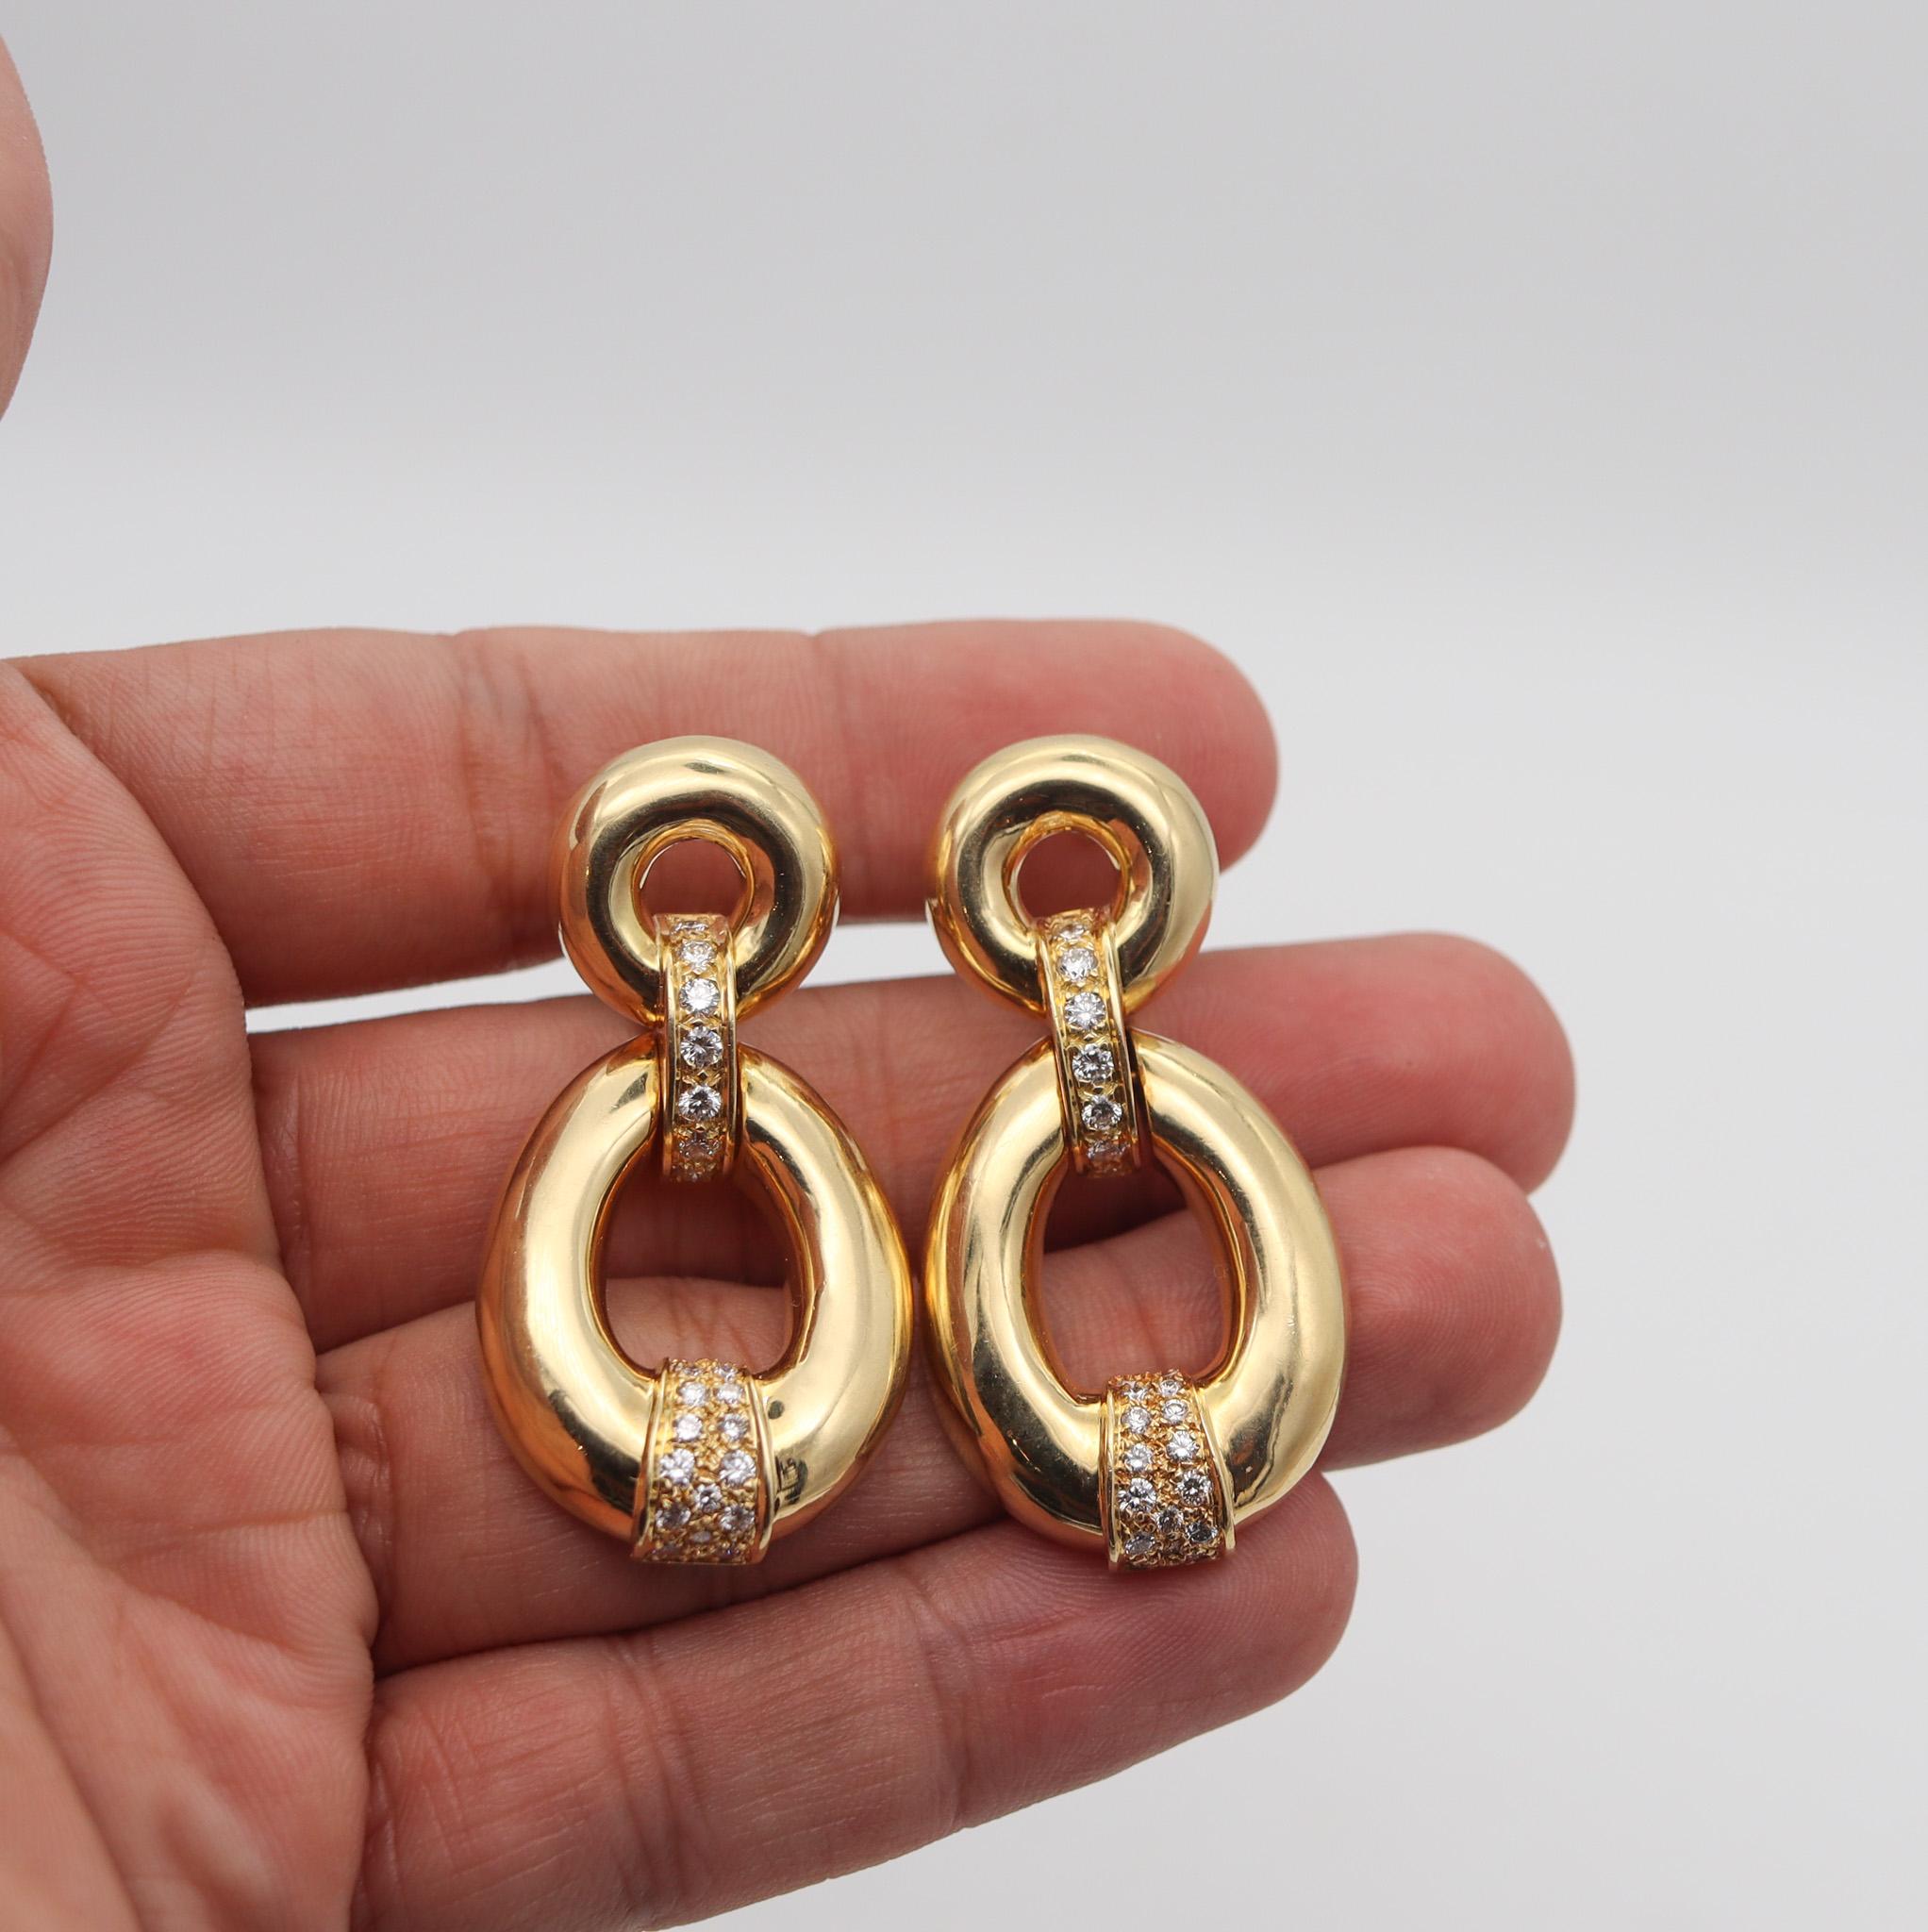 Fred Paris Door Knockers Earrings In 18Kt Yellow Gold With 2.40 Ctw VS Diamonds For Sale 1